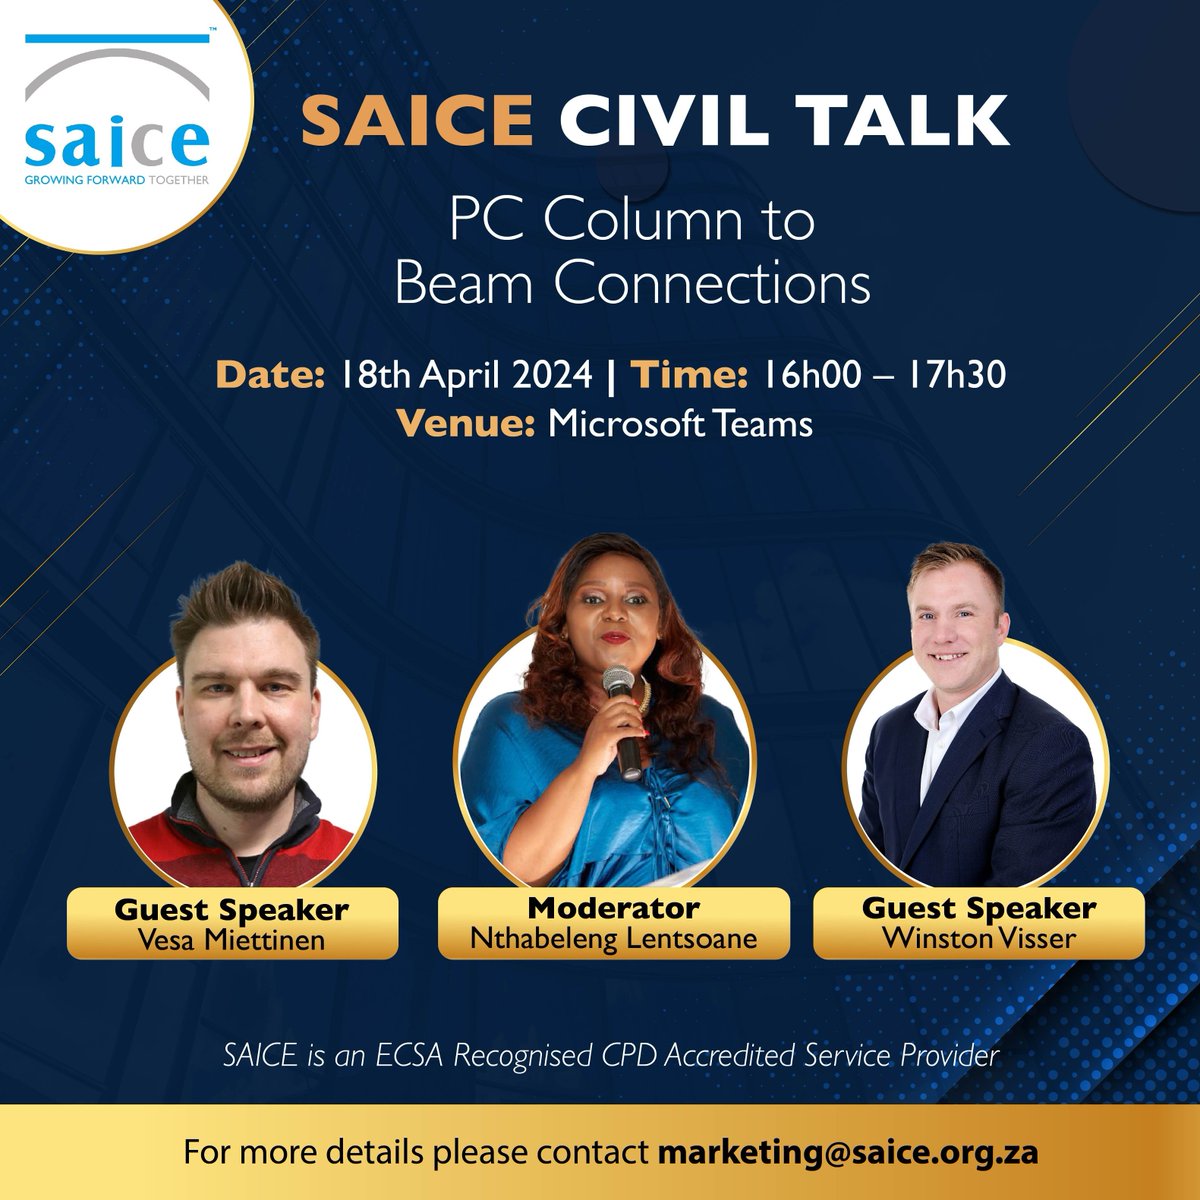 Remember to join our first Civil Talk of the year on the 18th of April 2024. Tune in at 16:00 to hear from our speakers, Vesa Miettinen and Winston Visser, as they share their insights. Save the date! Click on the link to register: ow.ly/SFG650R41BQ